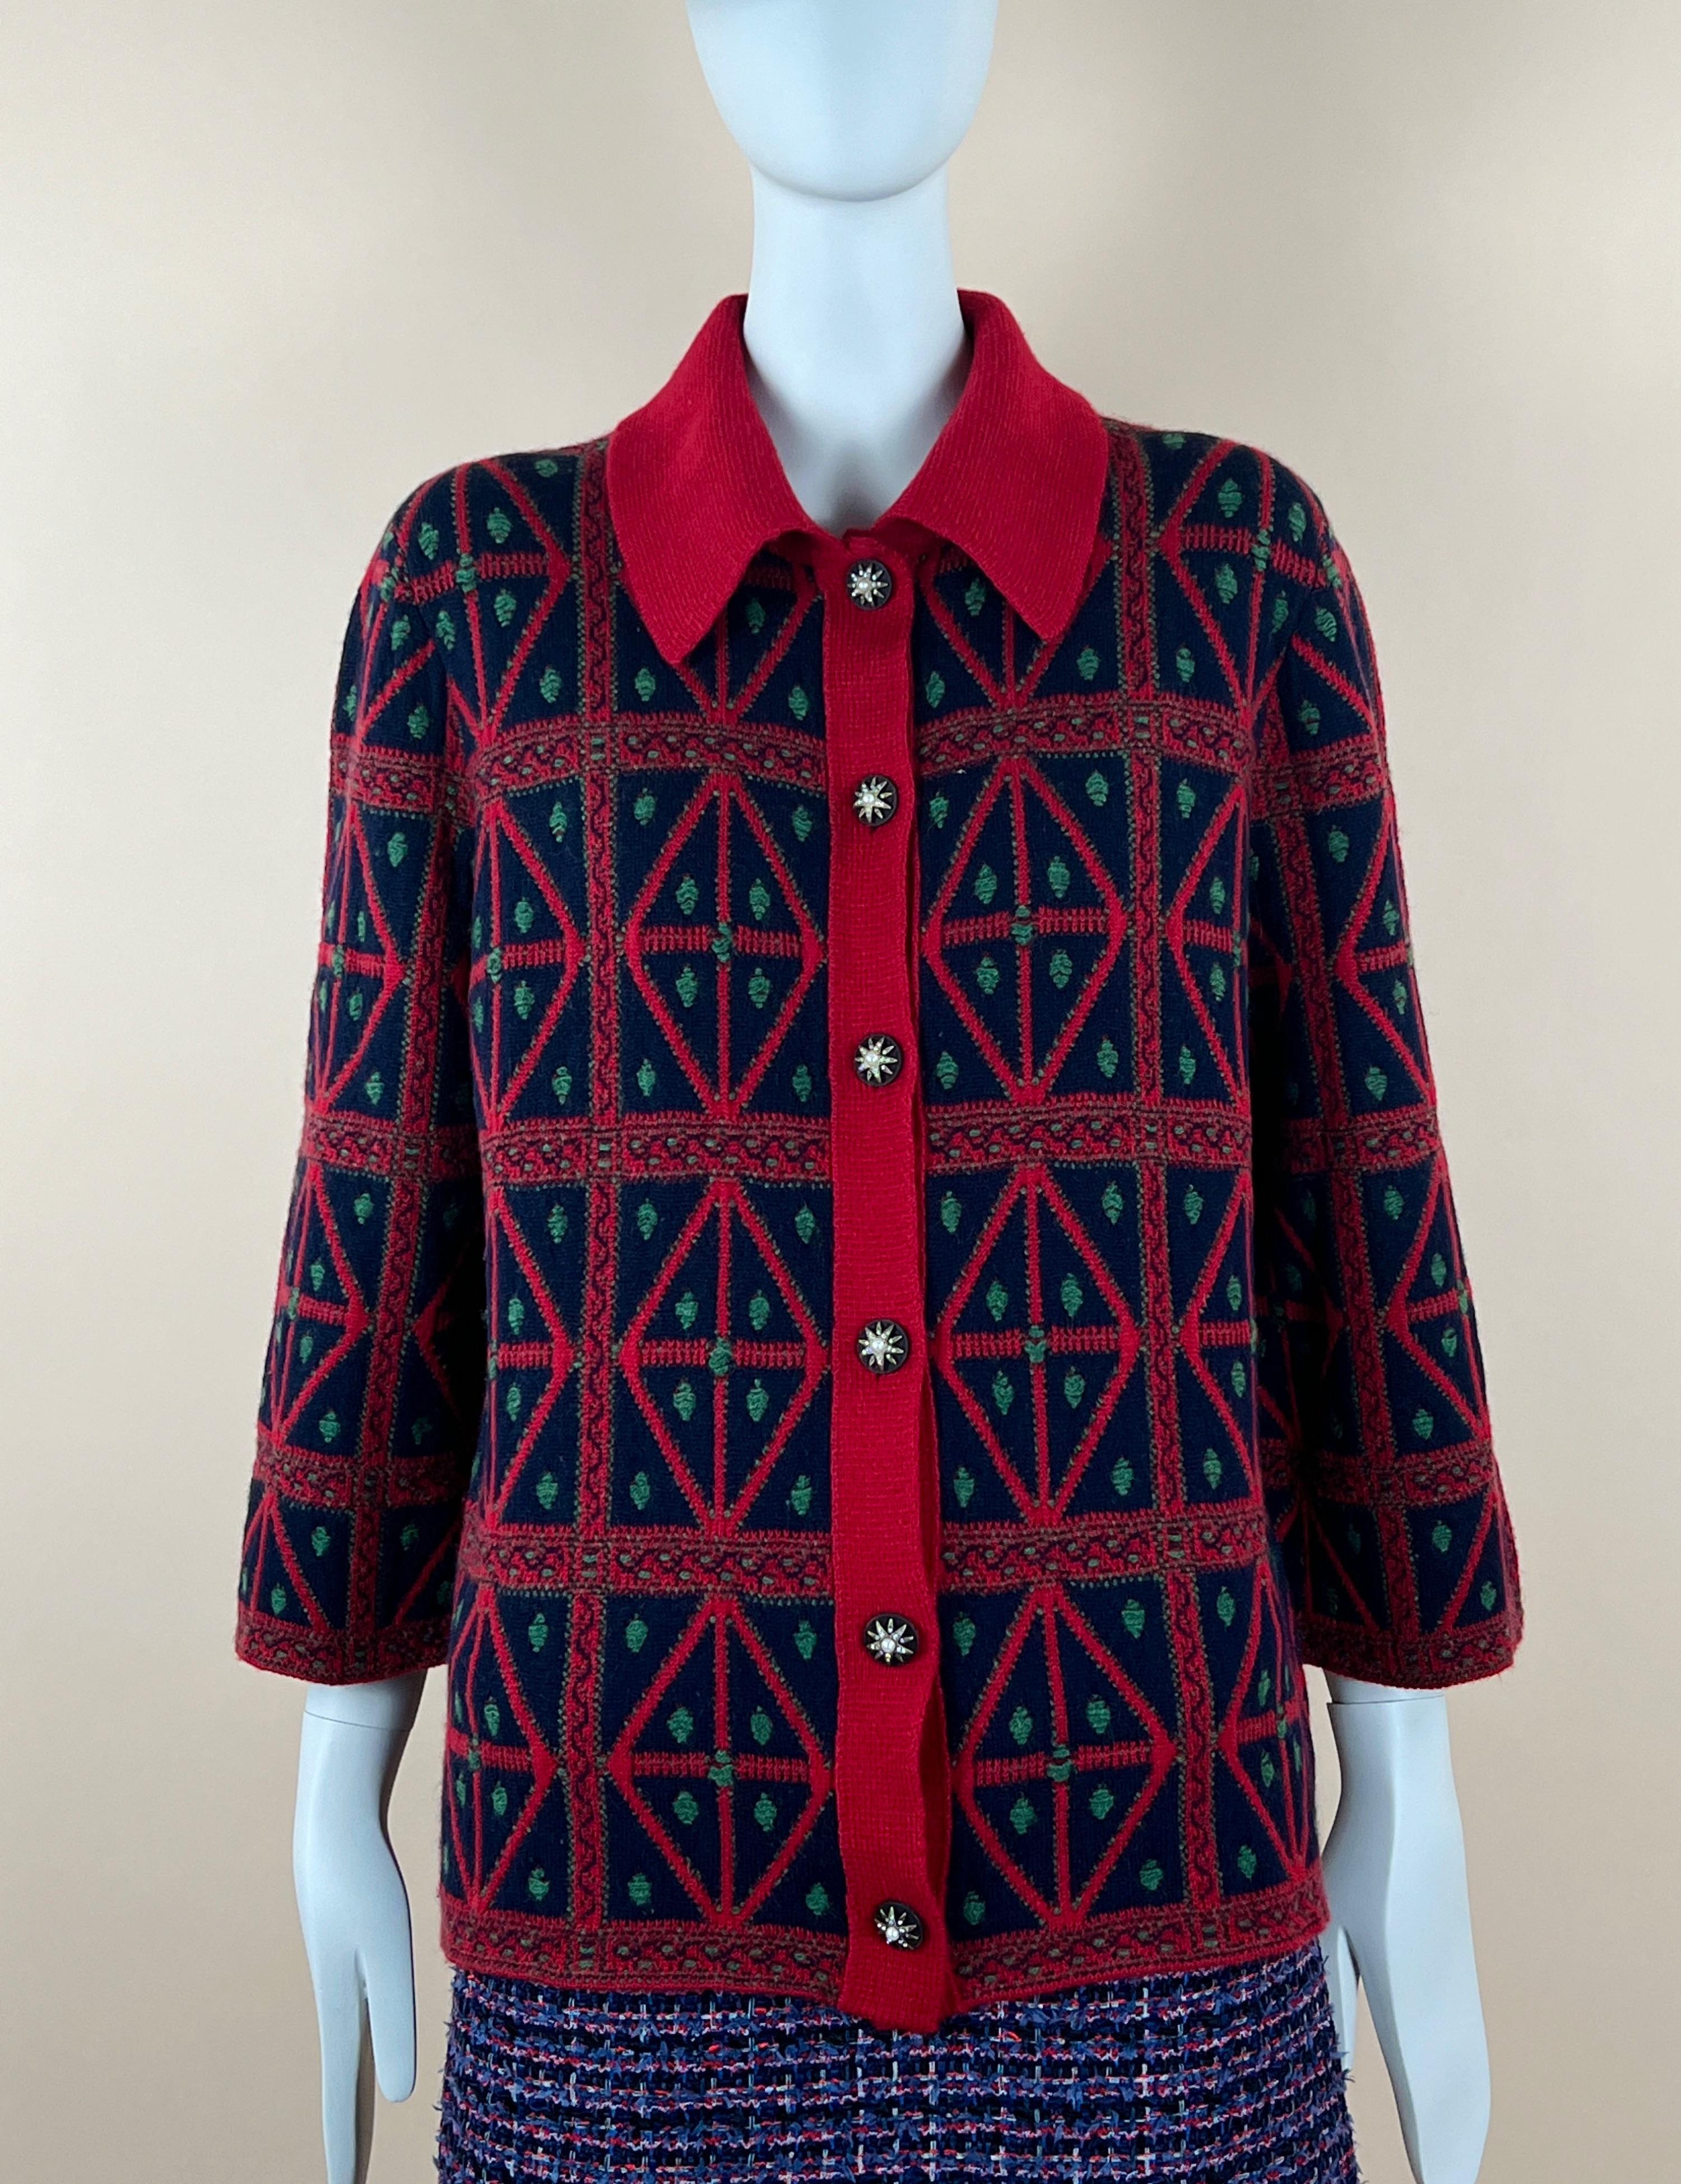 Women's Chanel Salzburg Collection  Red Cashmere Cardigan